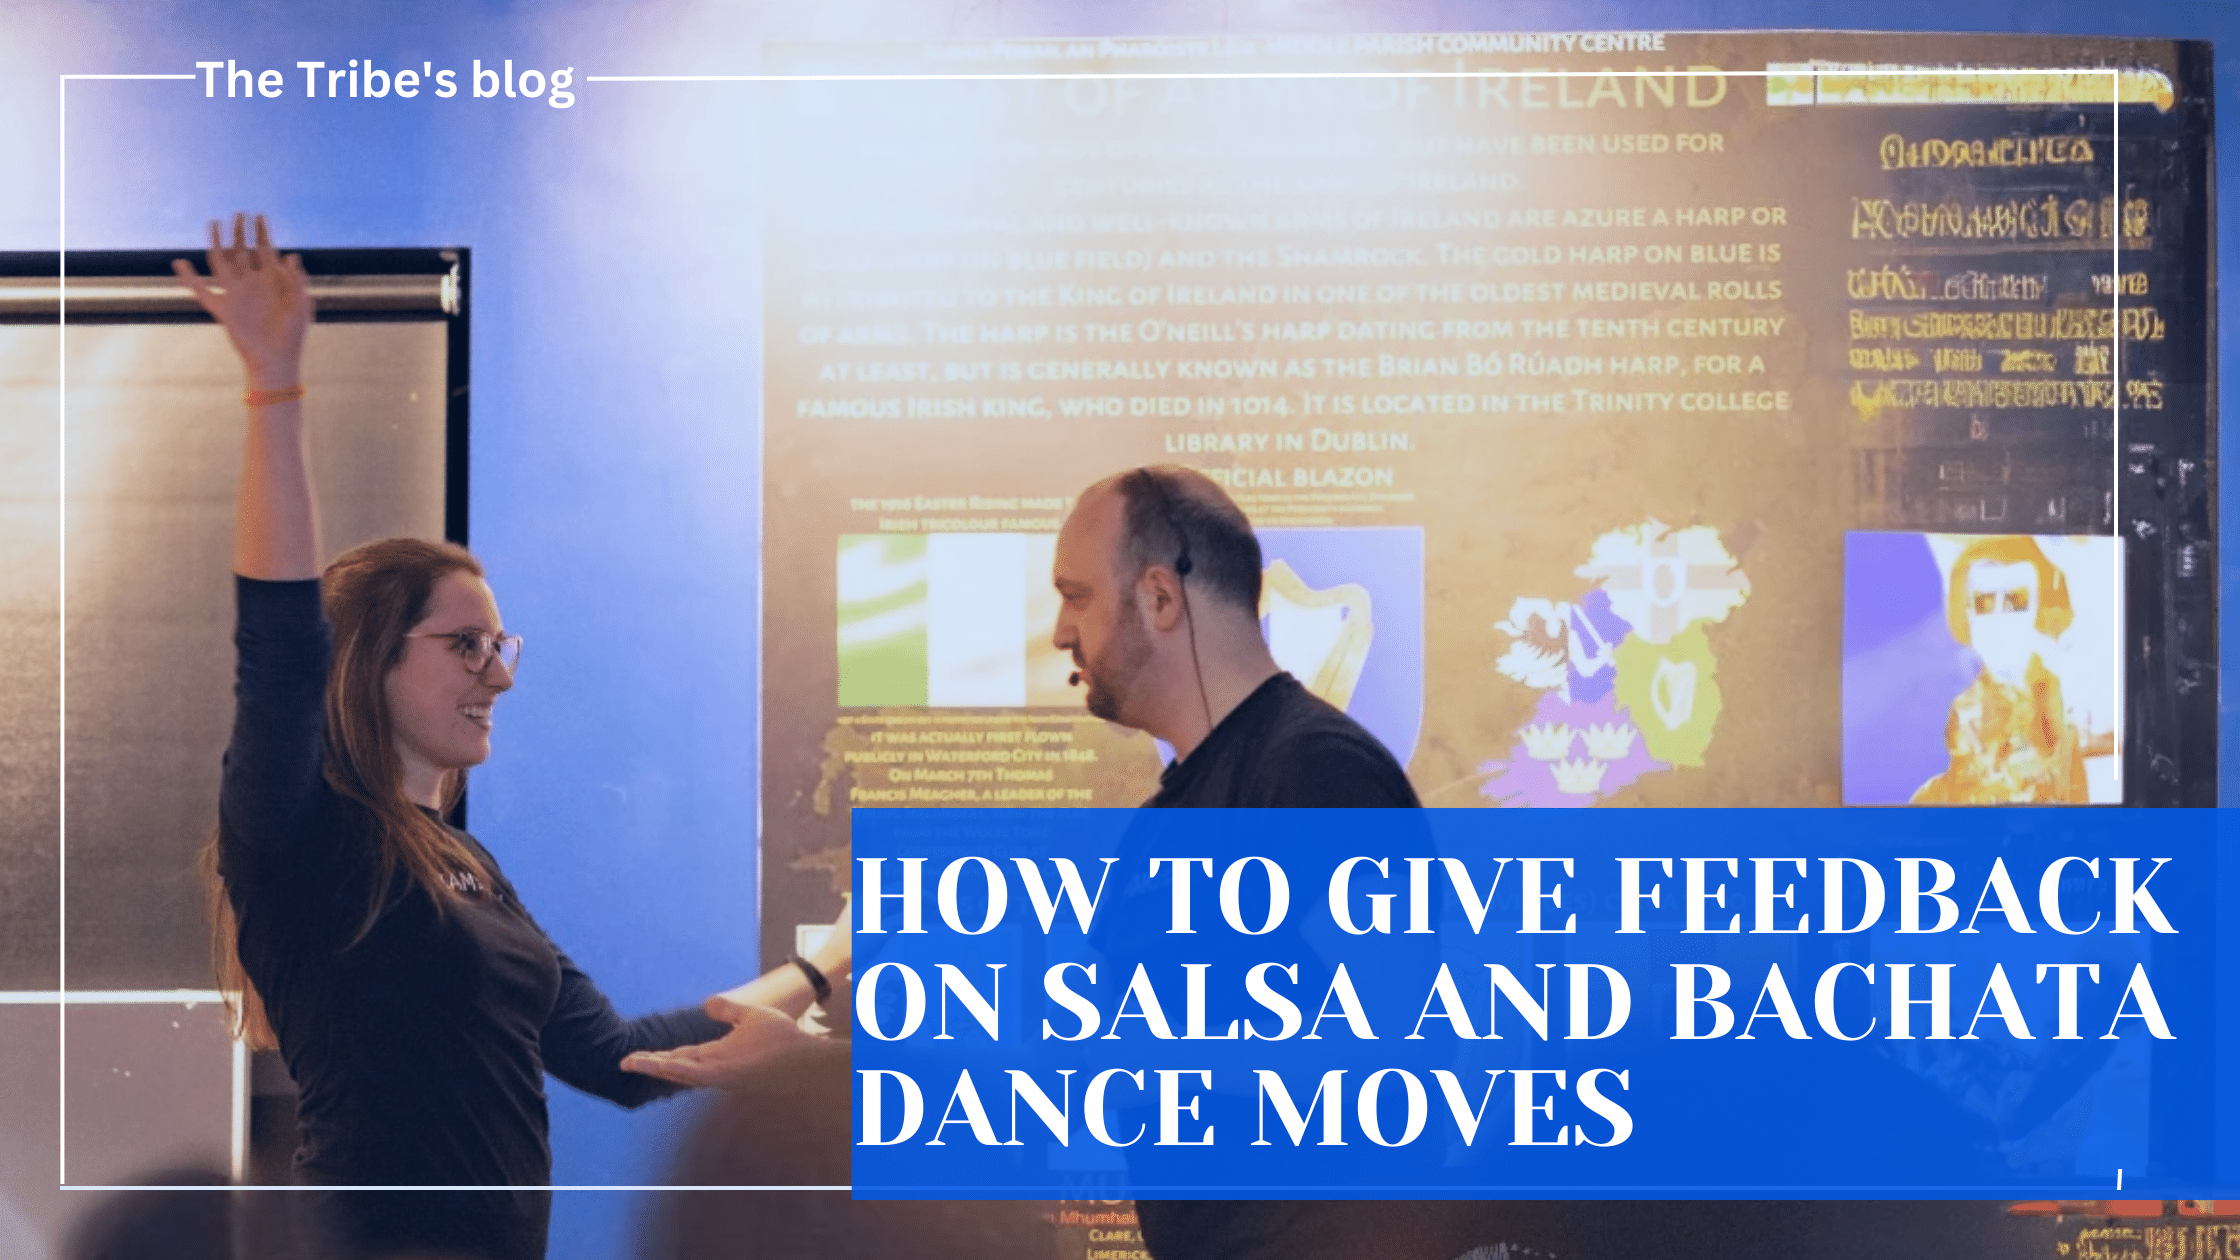 HOW TO GIVE FEEDBACK ON SALSA AND BACHATA DANCE MOVES: A GUIDE TO PROPER ETIQUETTE